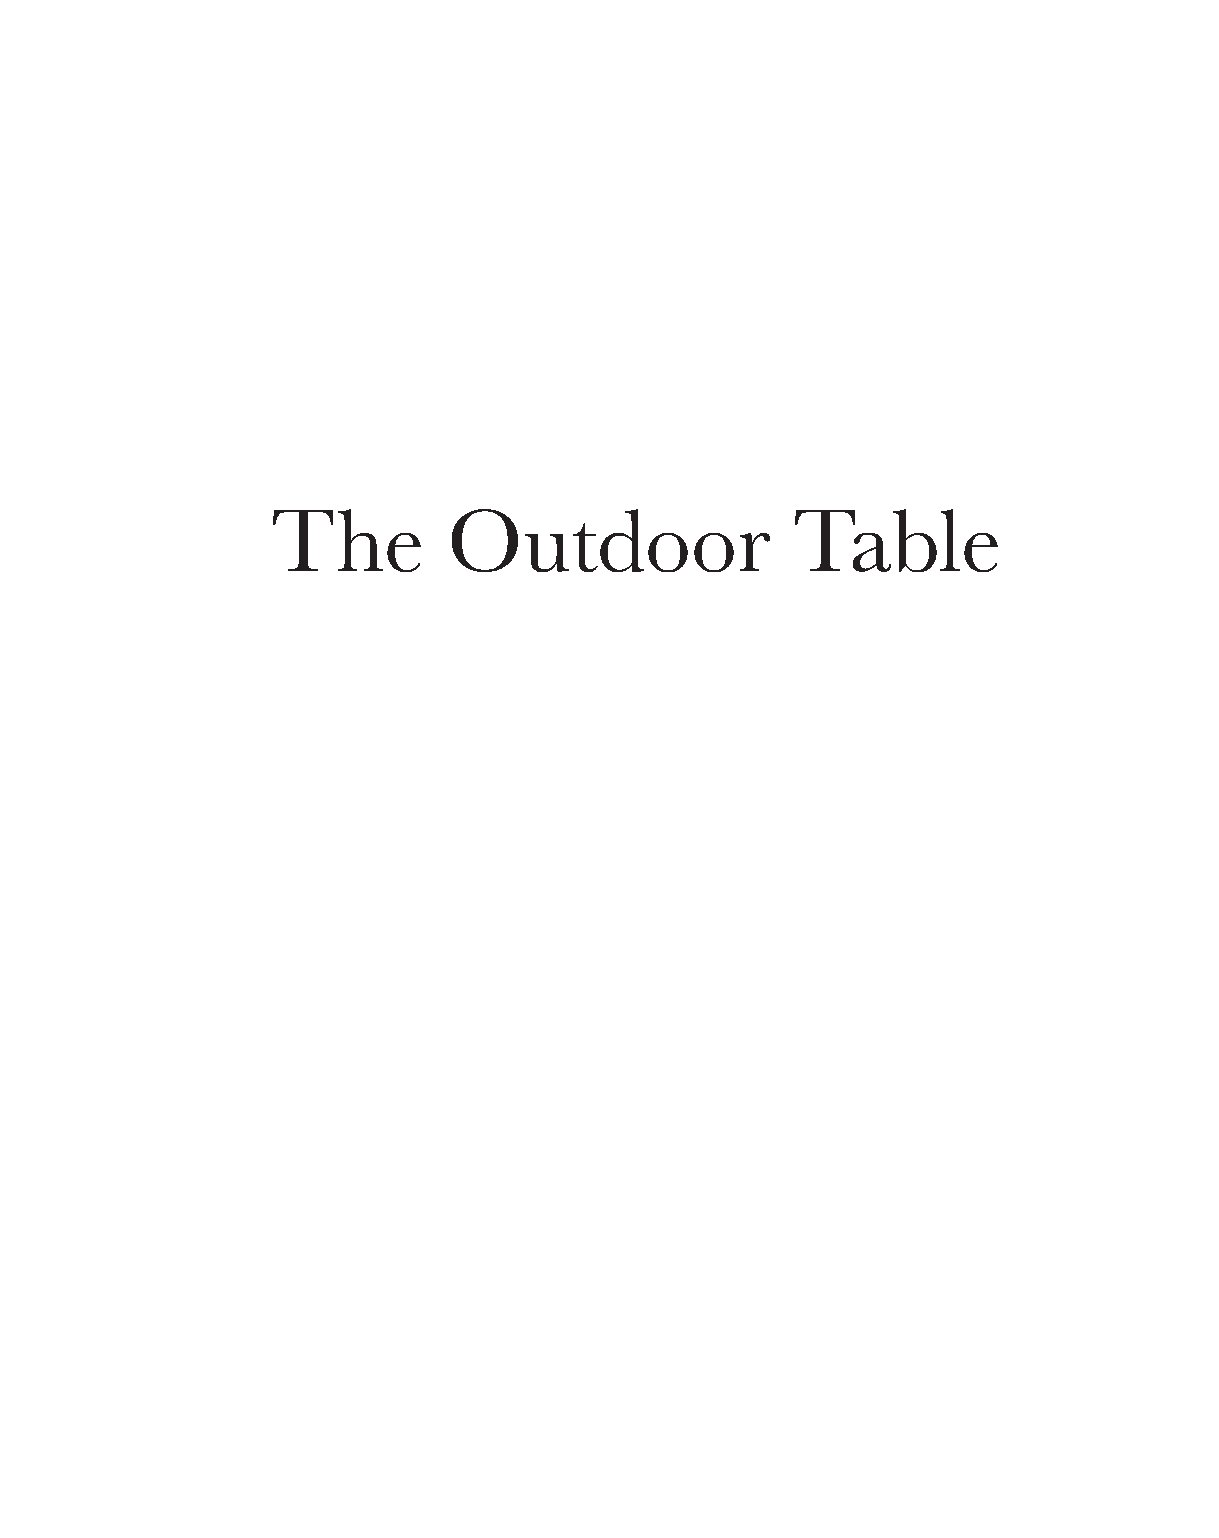 The Outdoor Table